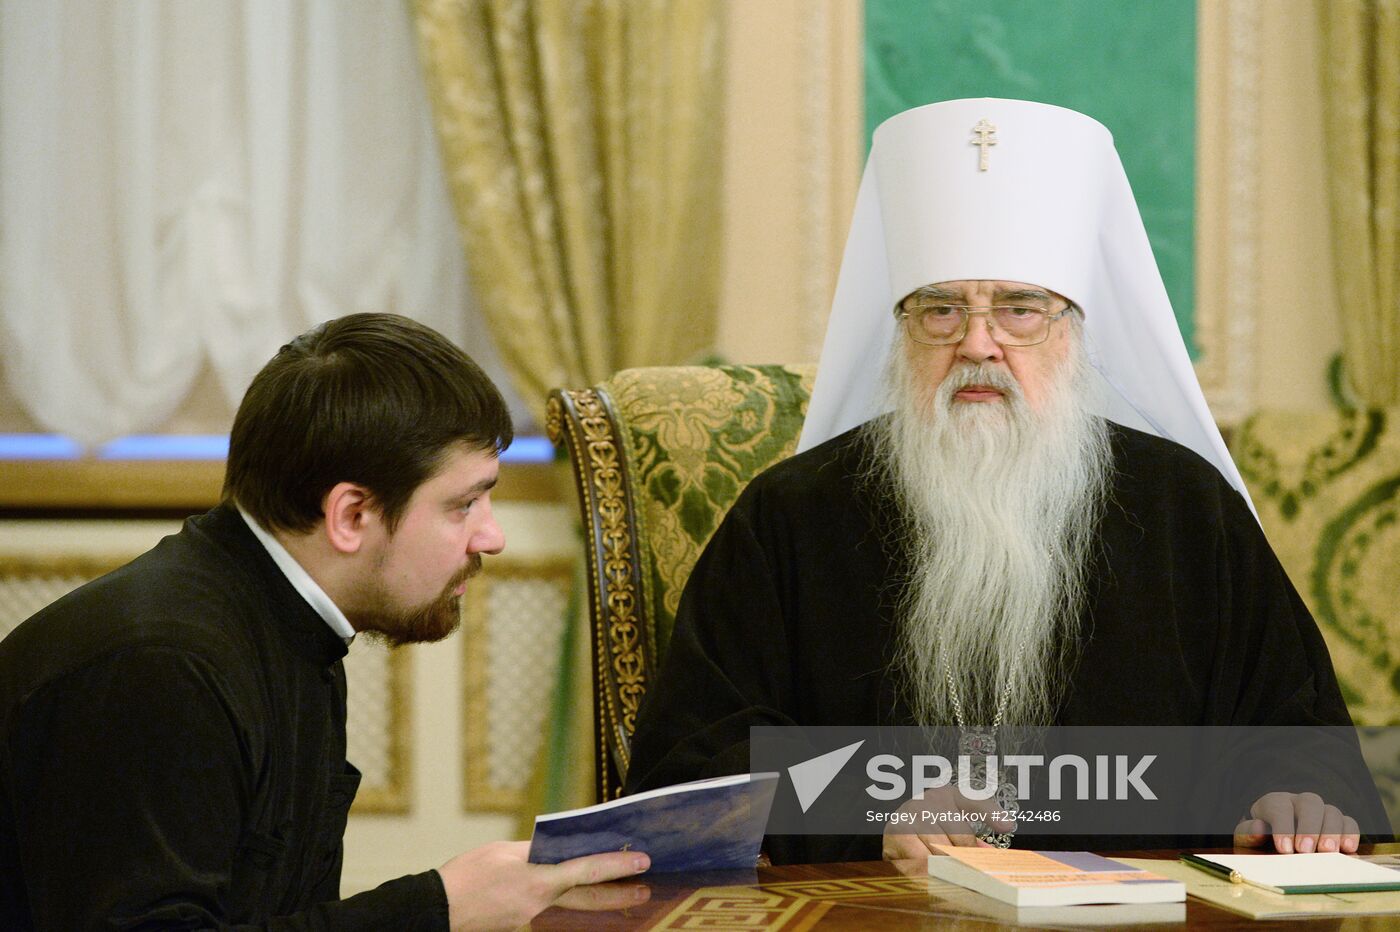 Meeting of Holy Synod of Russian Orthodox Church